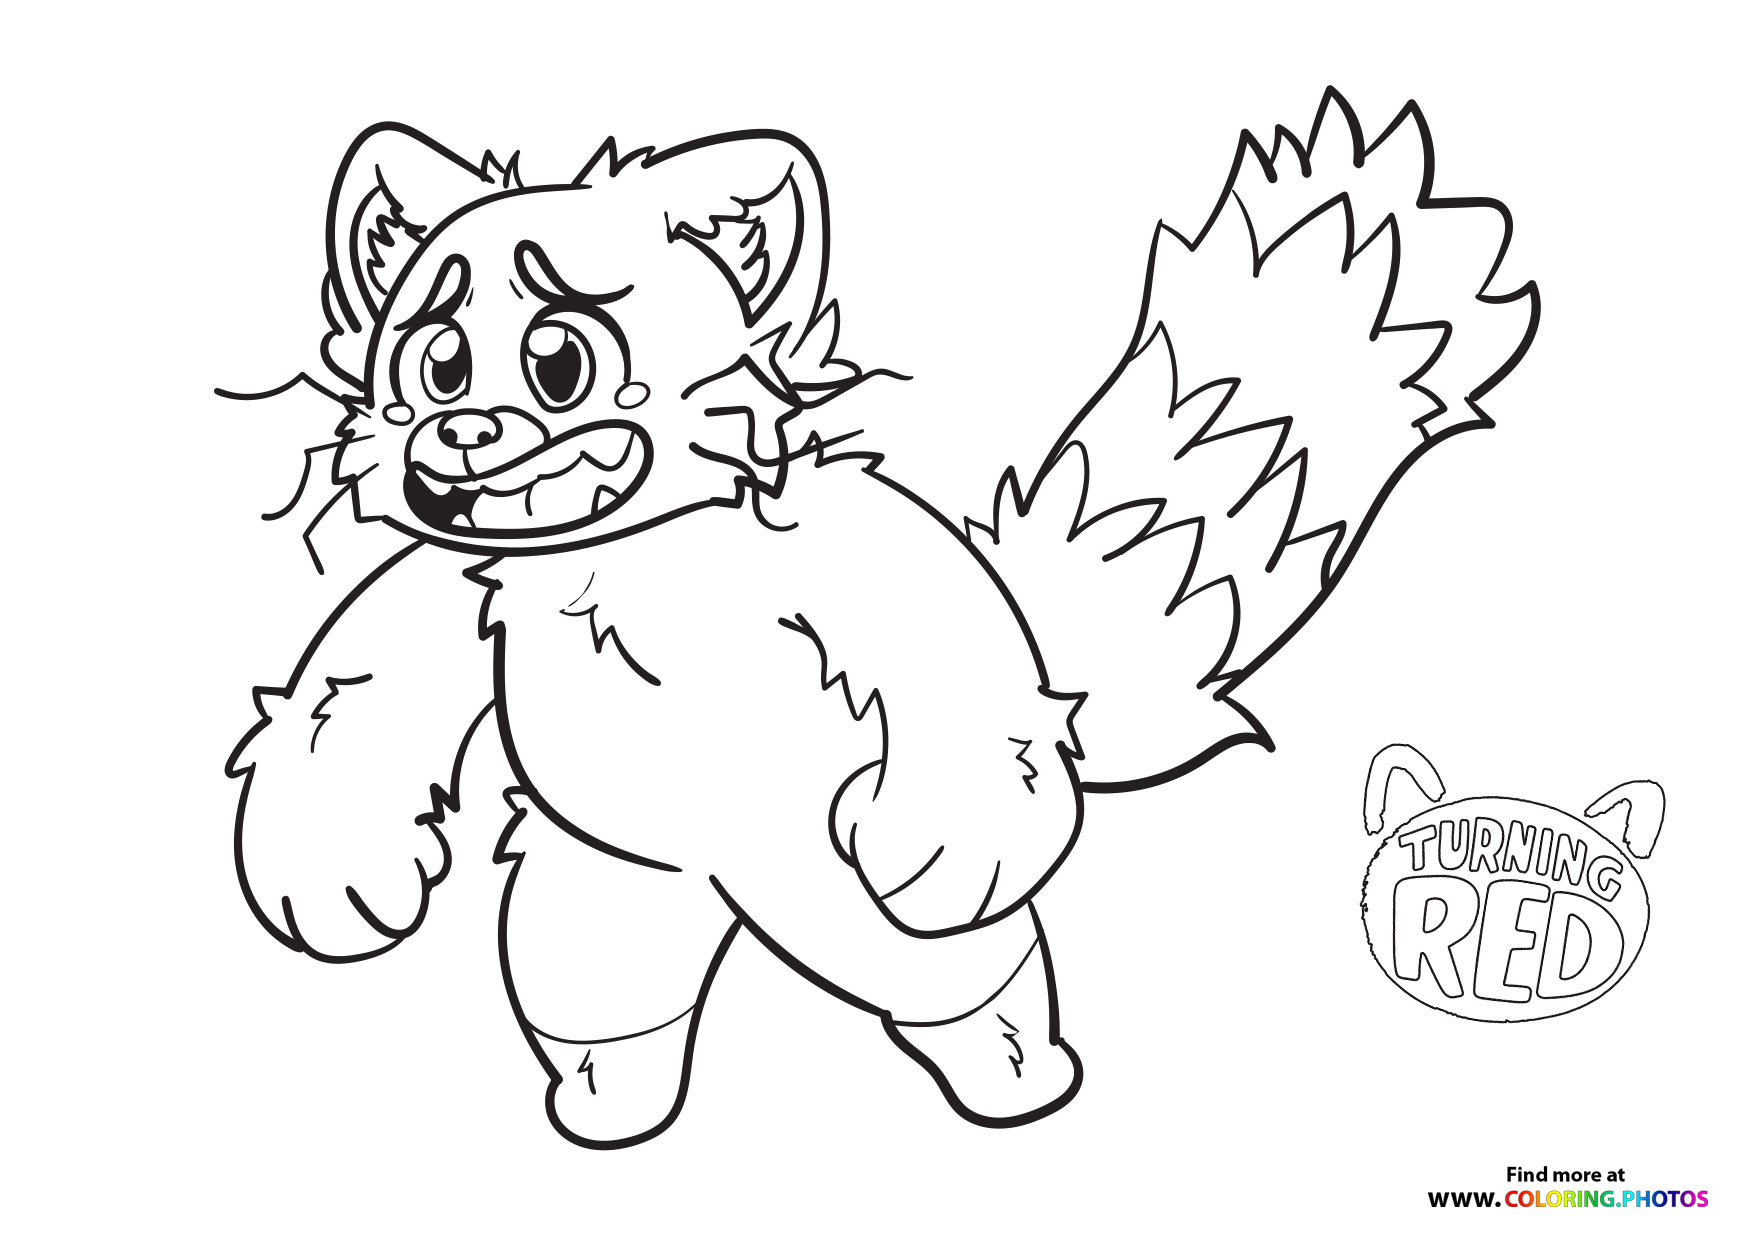 Mei Lee panda form - Coloring Pages for kids